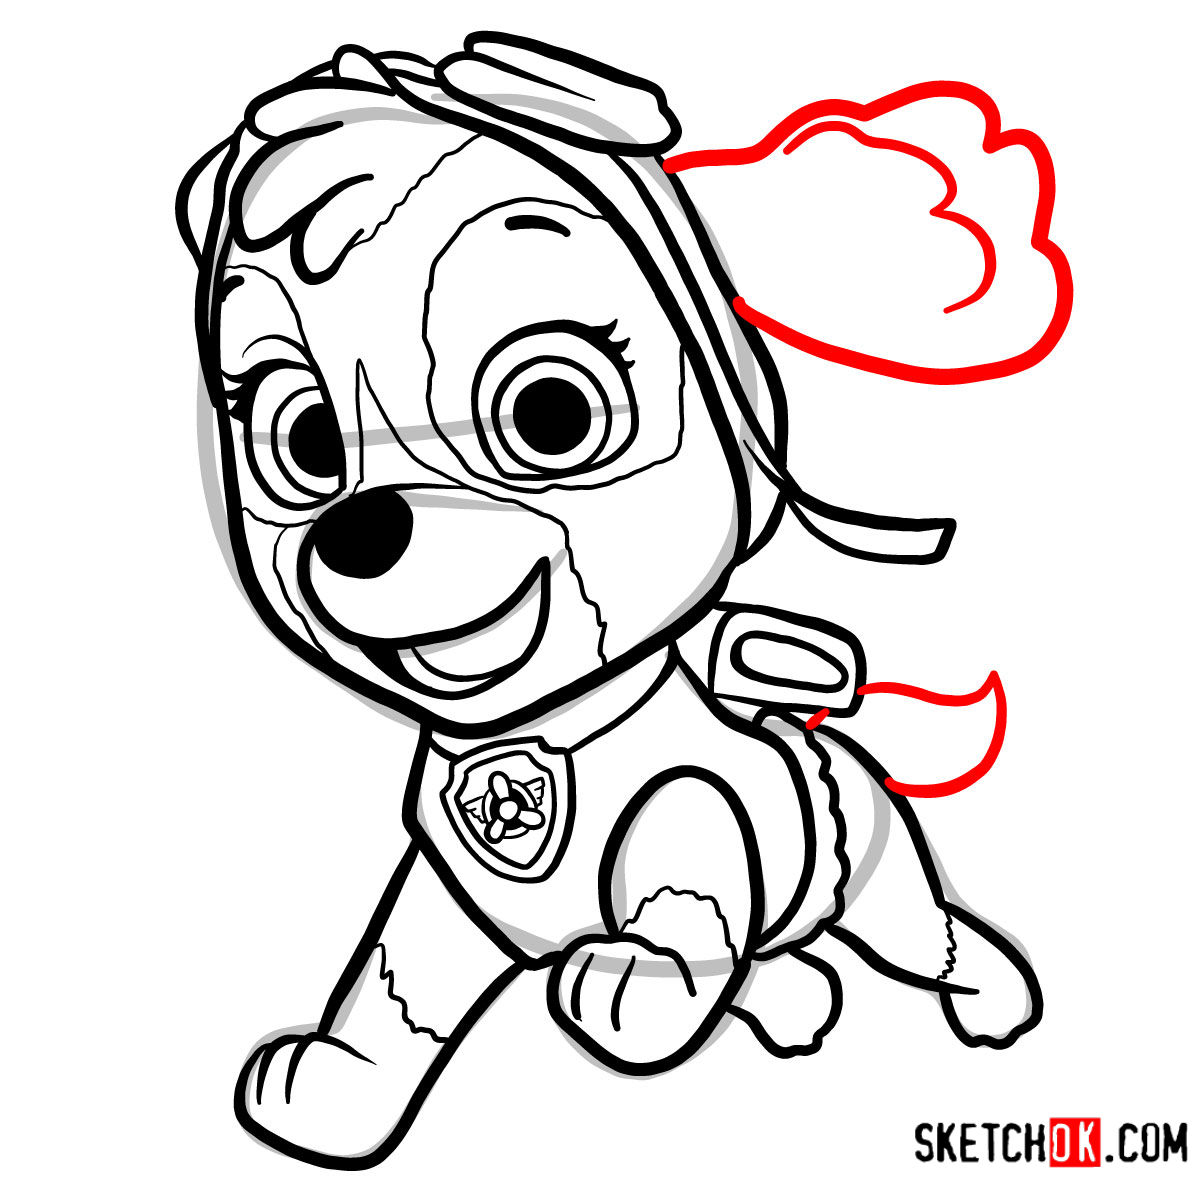 Learn How to Draw Skye, the PAW Patrol's Air Rescue Pup